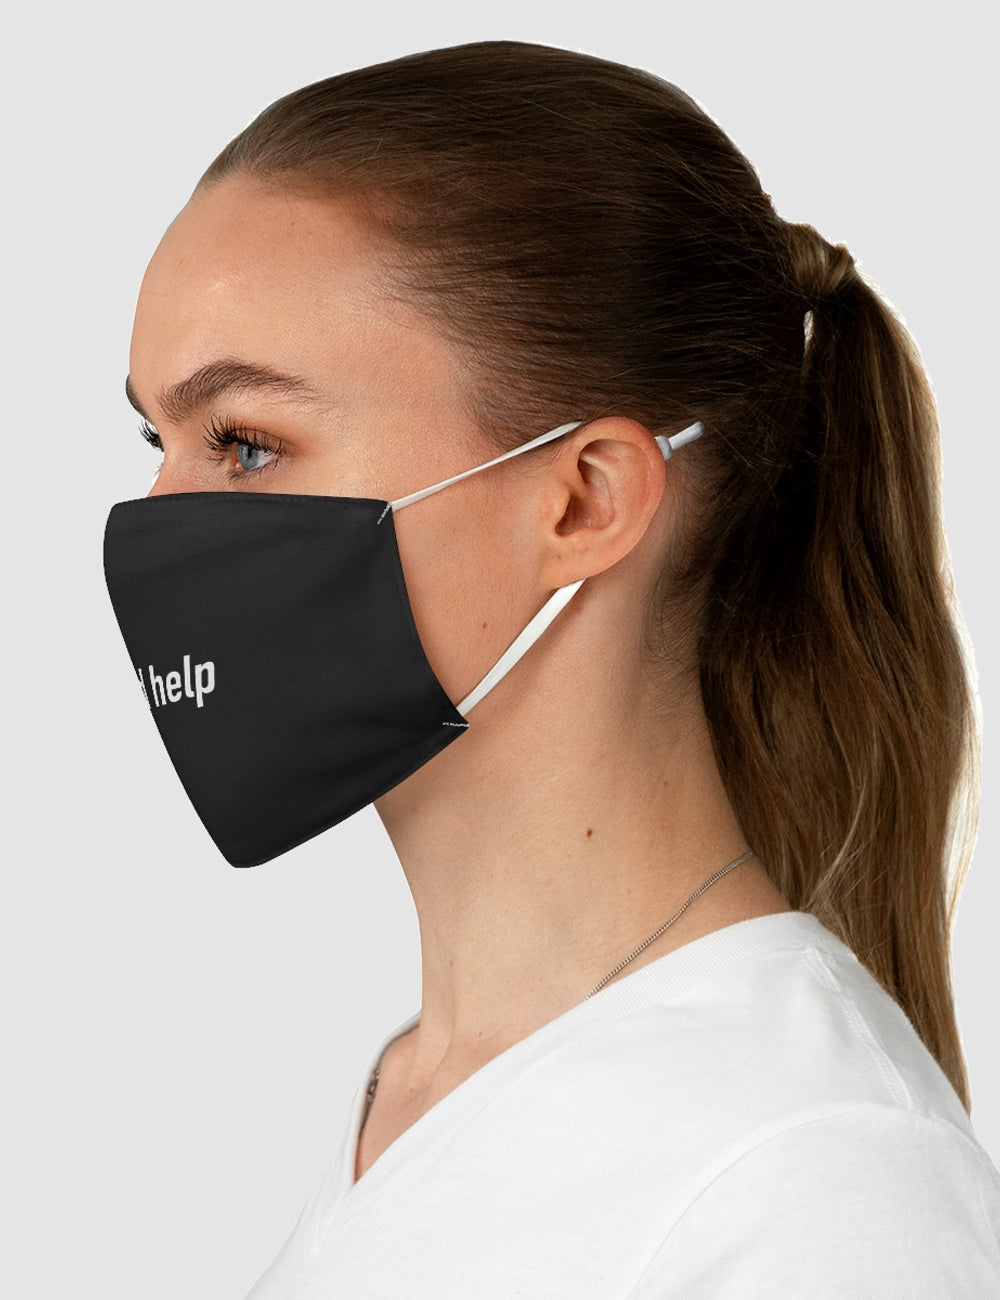 Send Help | Two-Layer Polyester Fabric Face Mask OniTakai